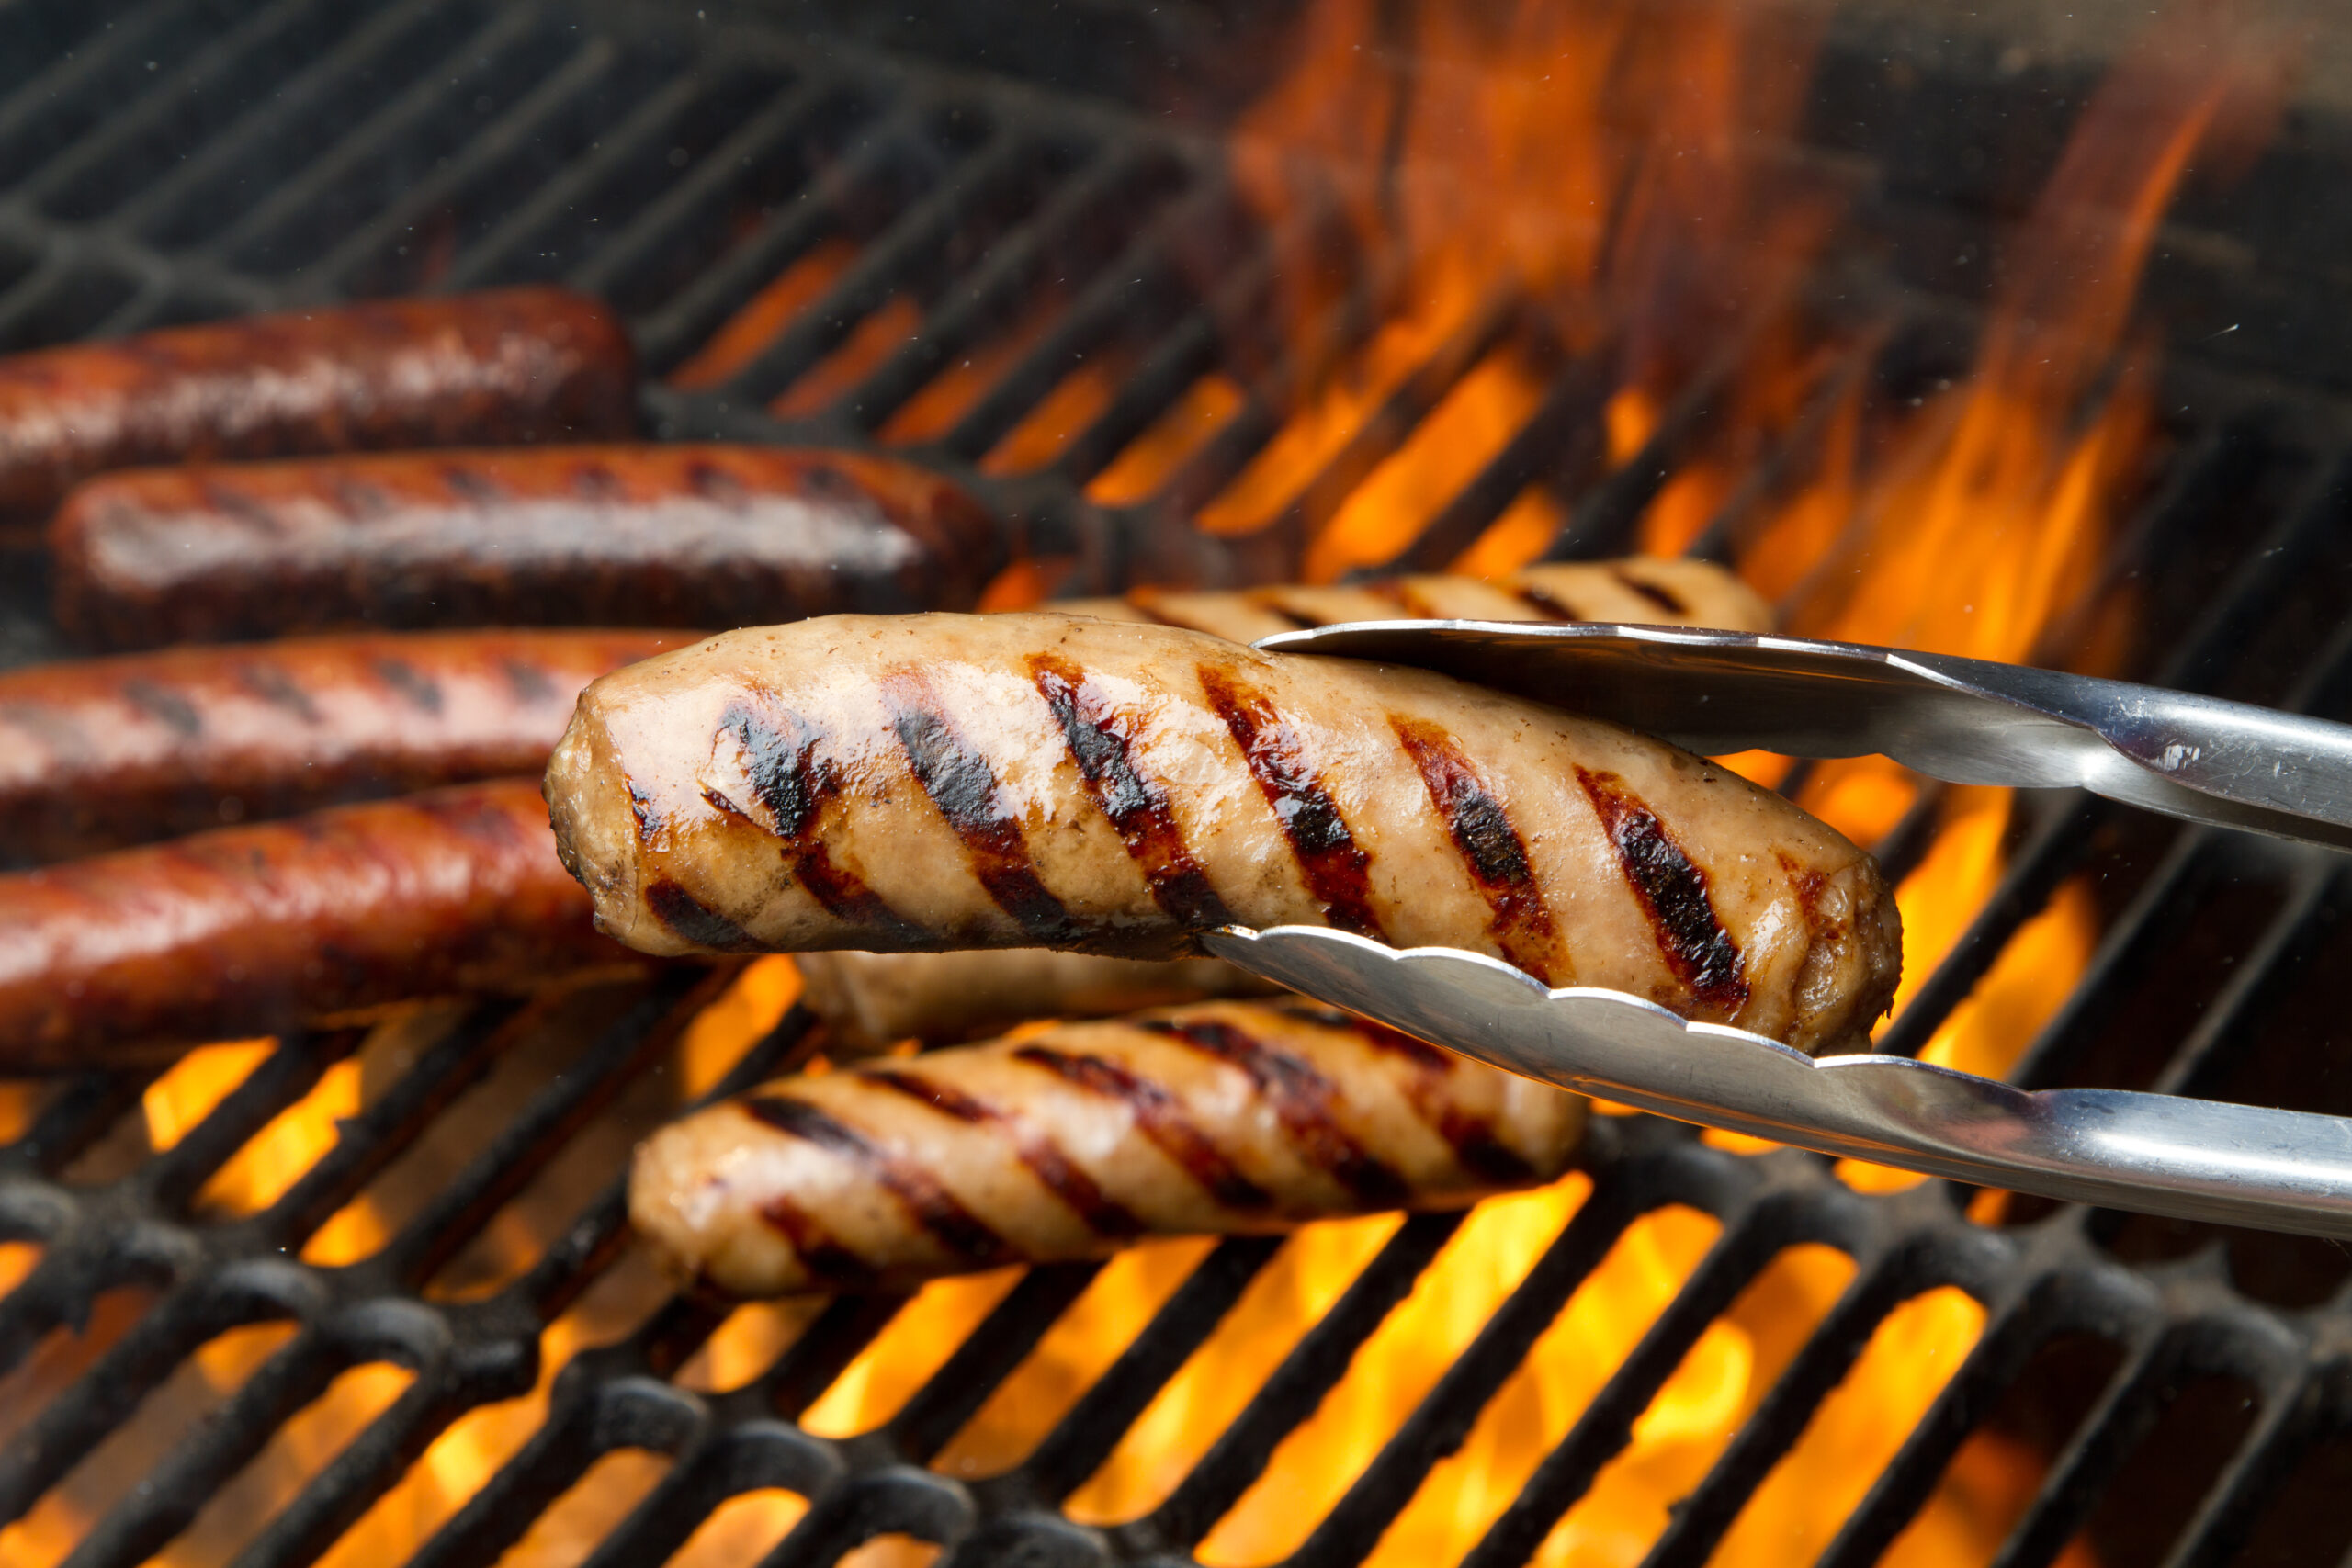 Bratwurst on a flaming grill